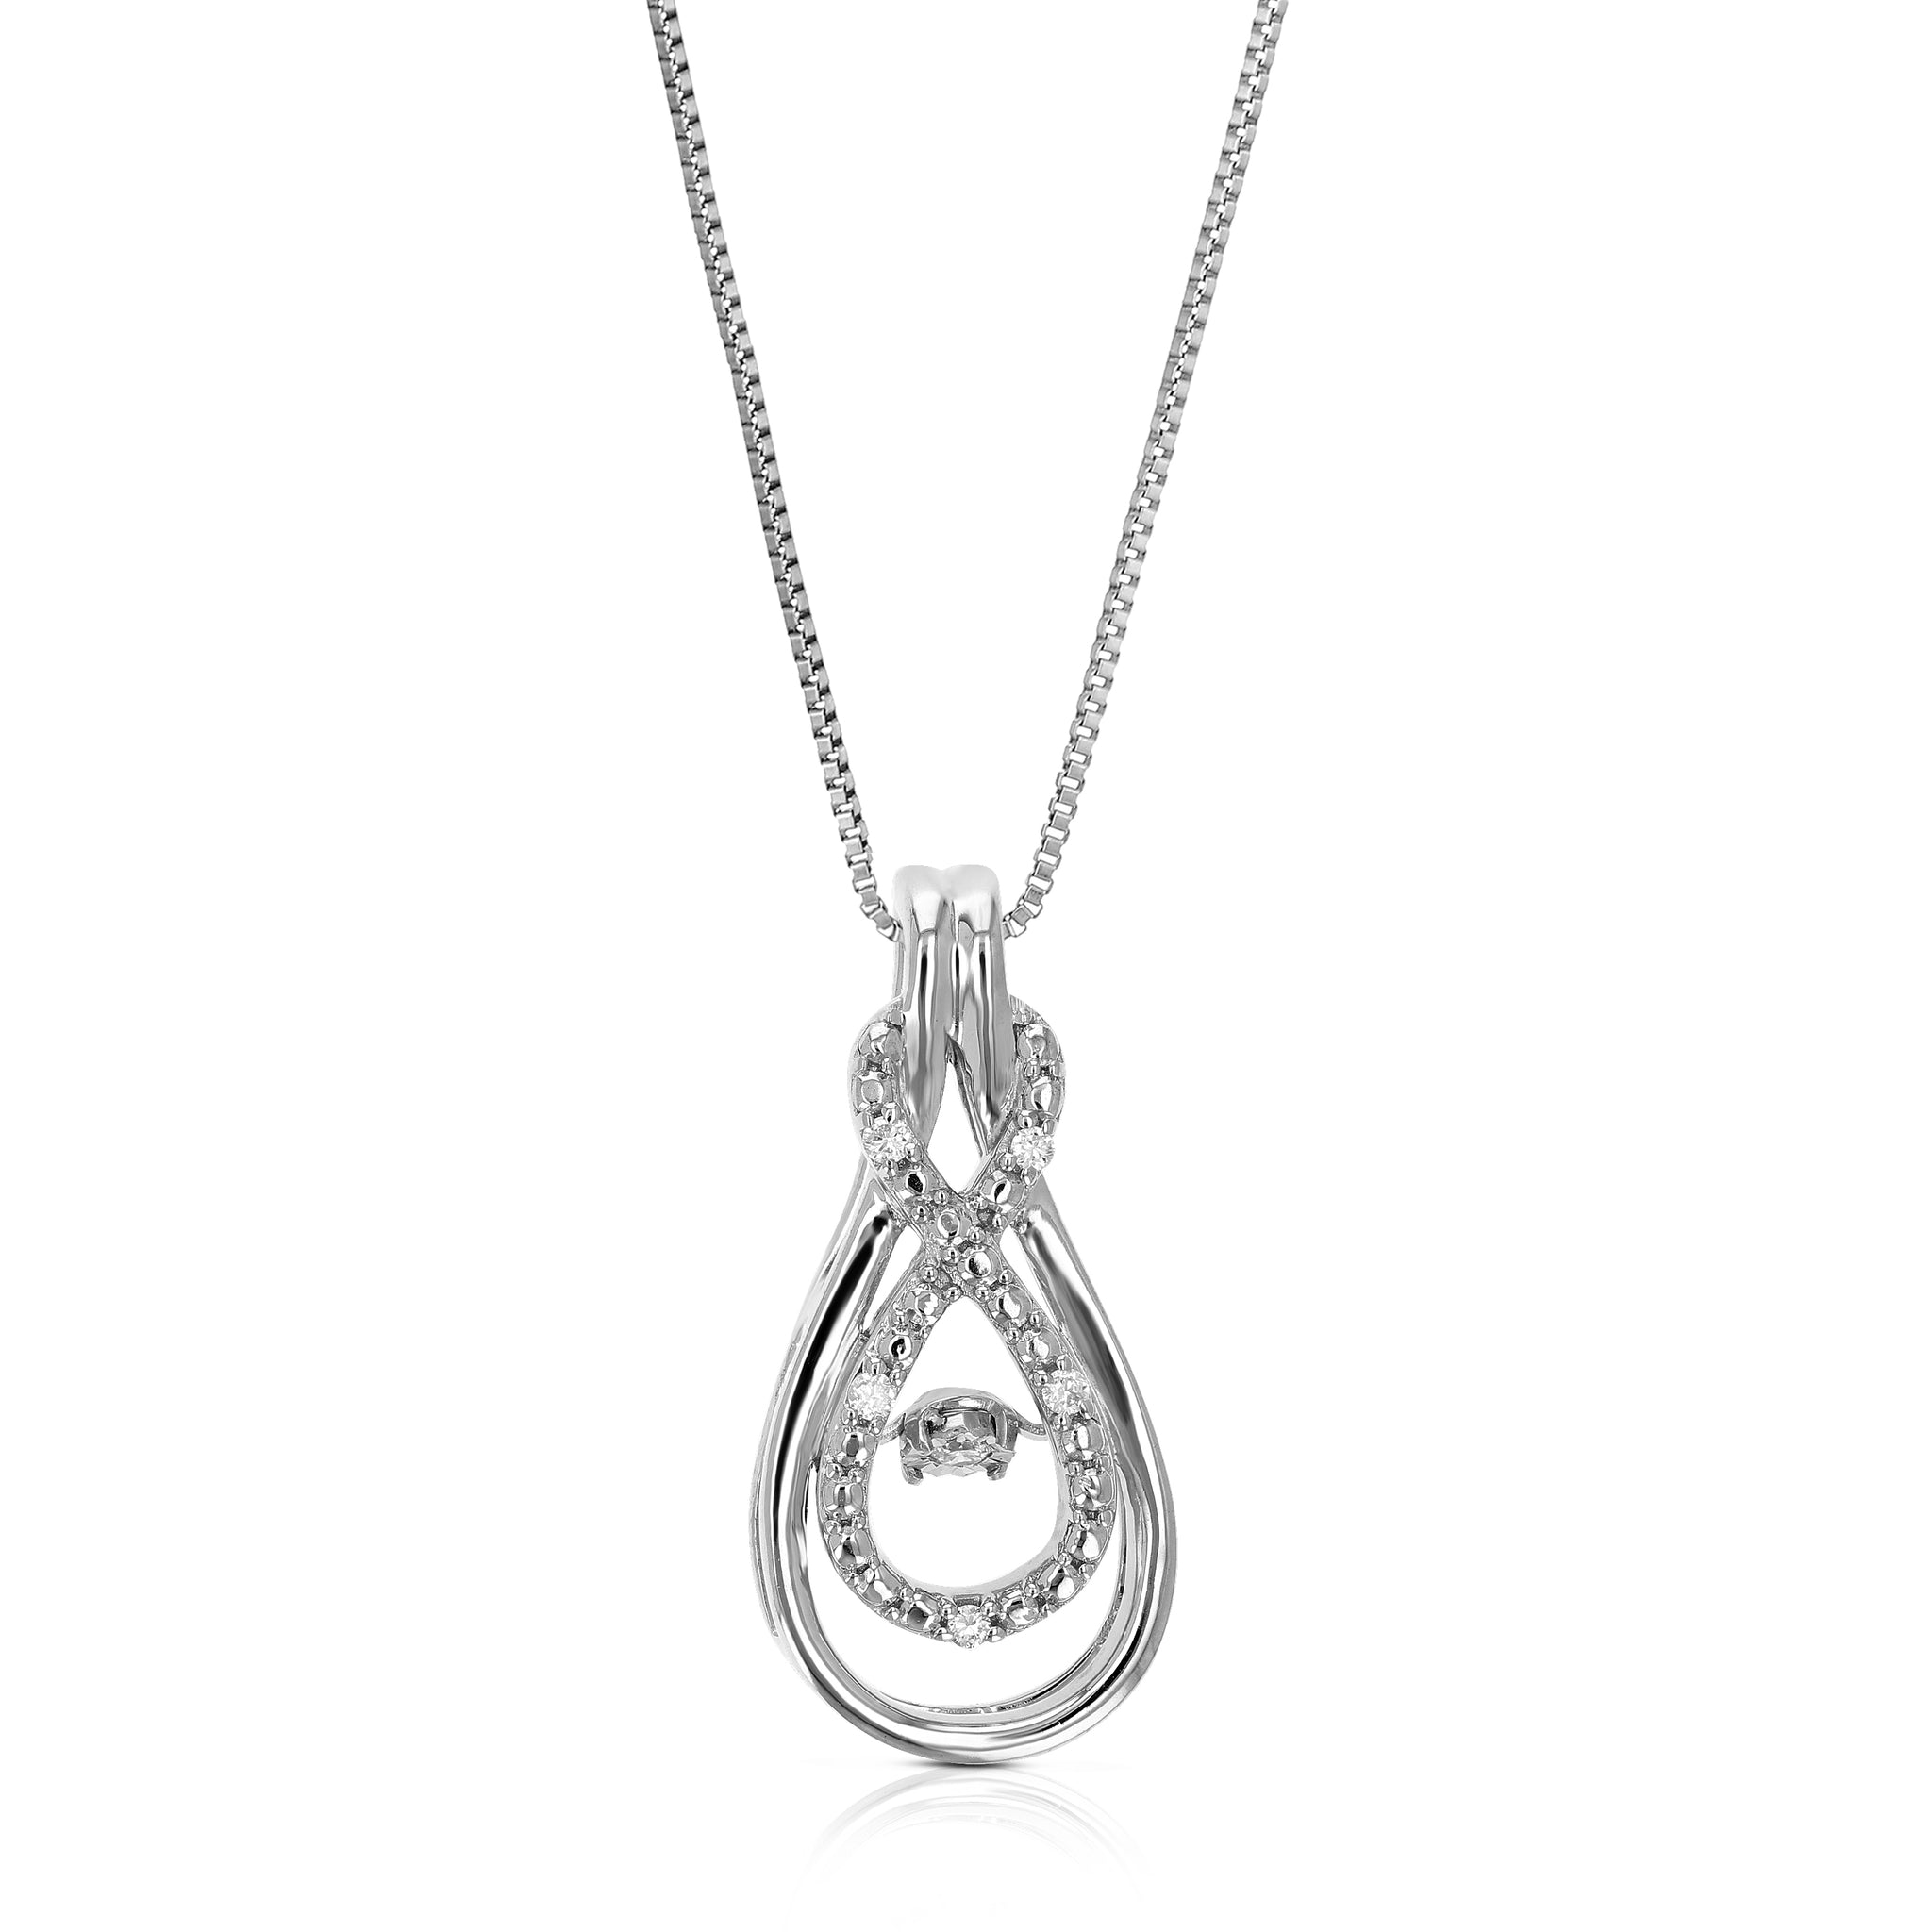 Dancing Diamonds in Motion 14kt Gold Diamond Pendant Necklace with 0.12  Carats t.w - Jewelry Factory - North Hollywood, CA